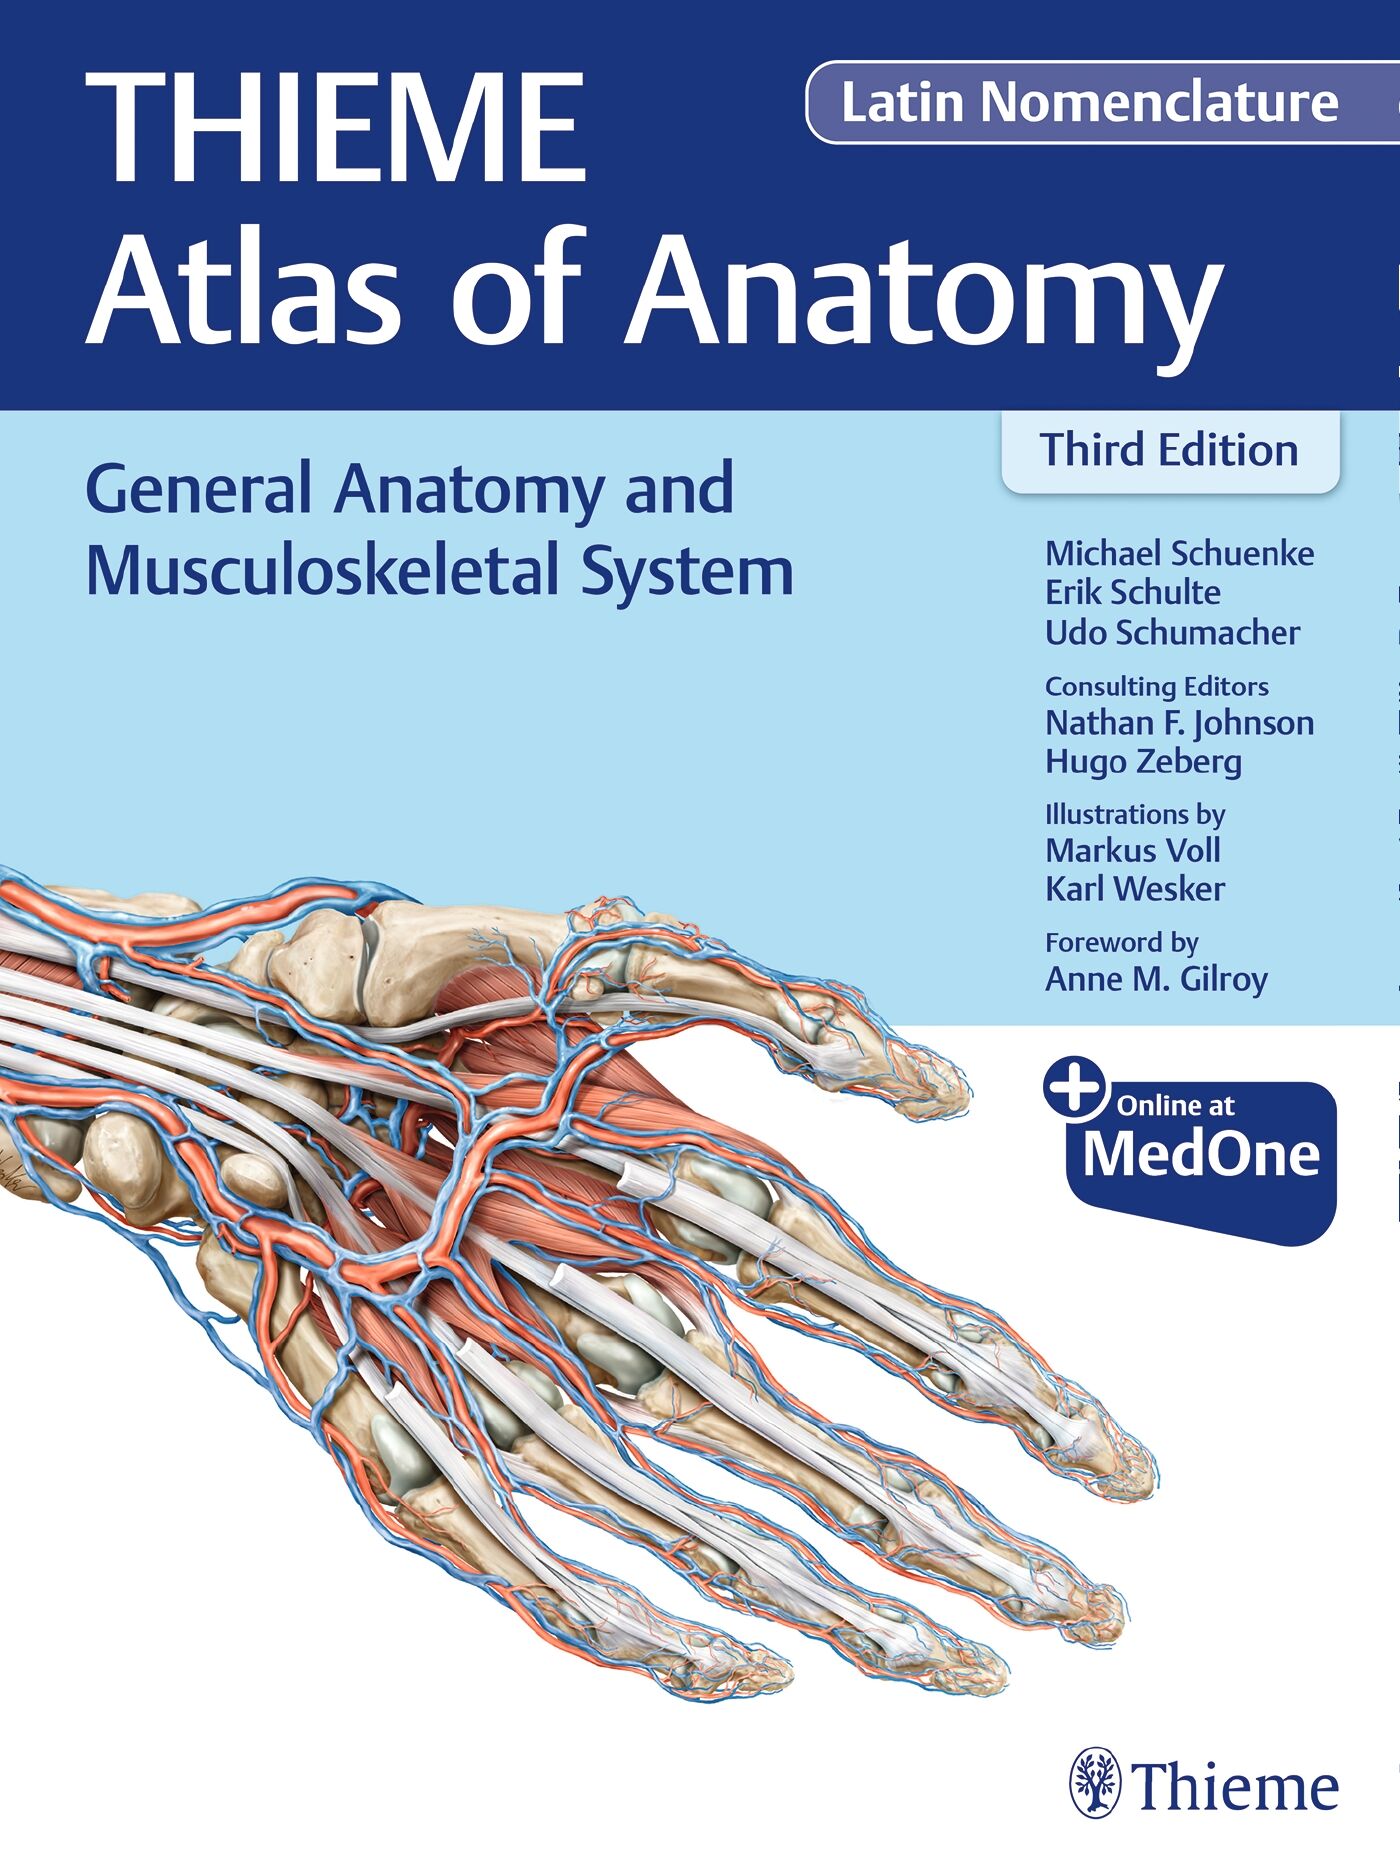 General Anatomy and Musculoskeletal System (THIEME Atlas of Anatomy), Latin Nomenclature, 9781684200856